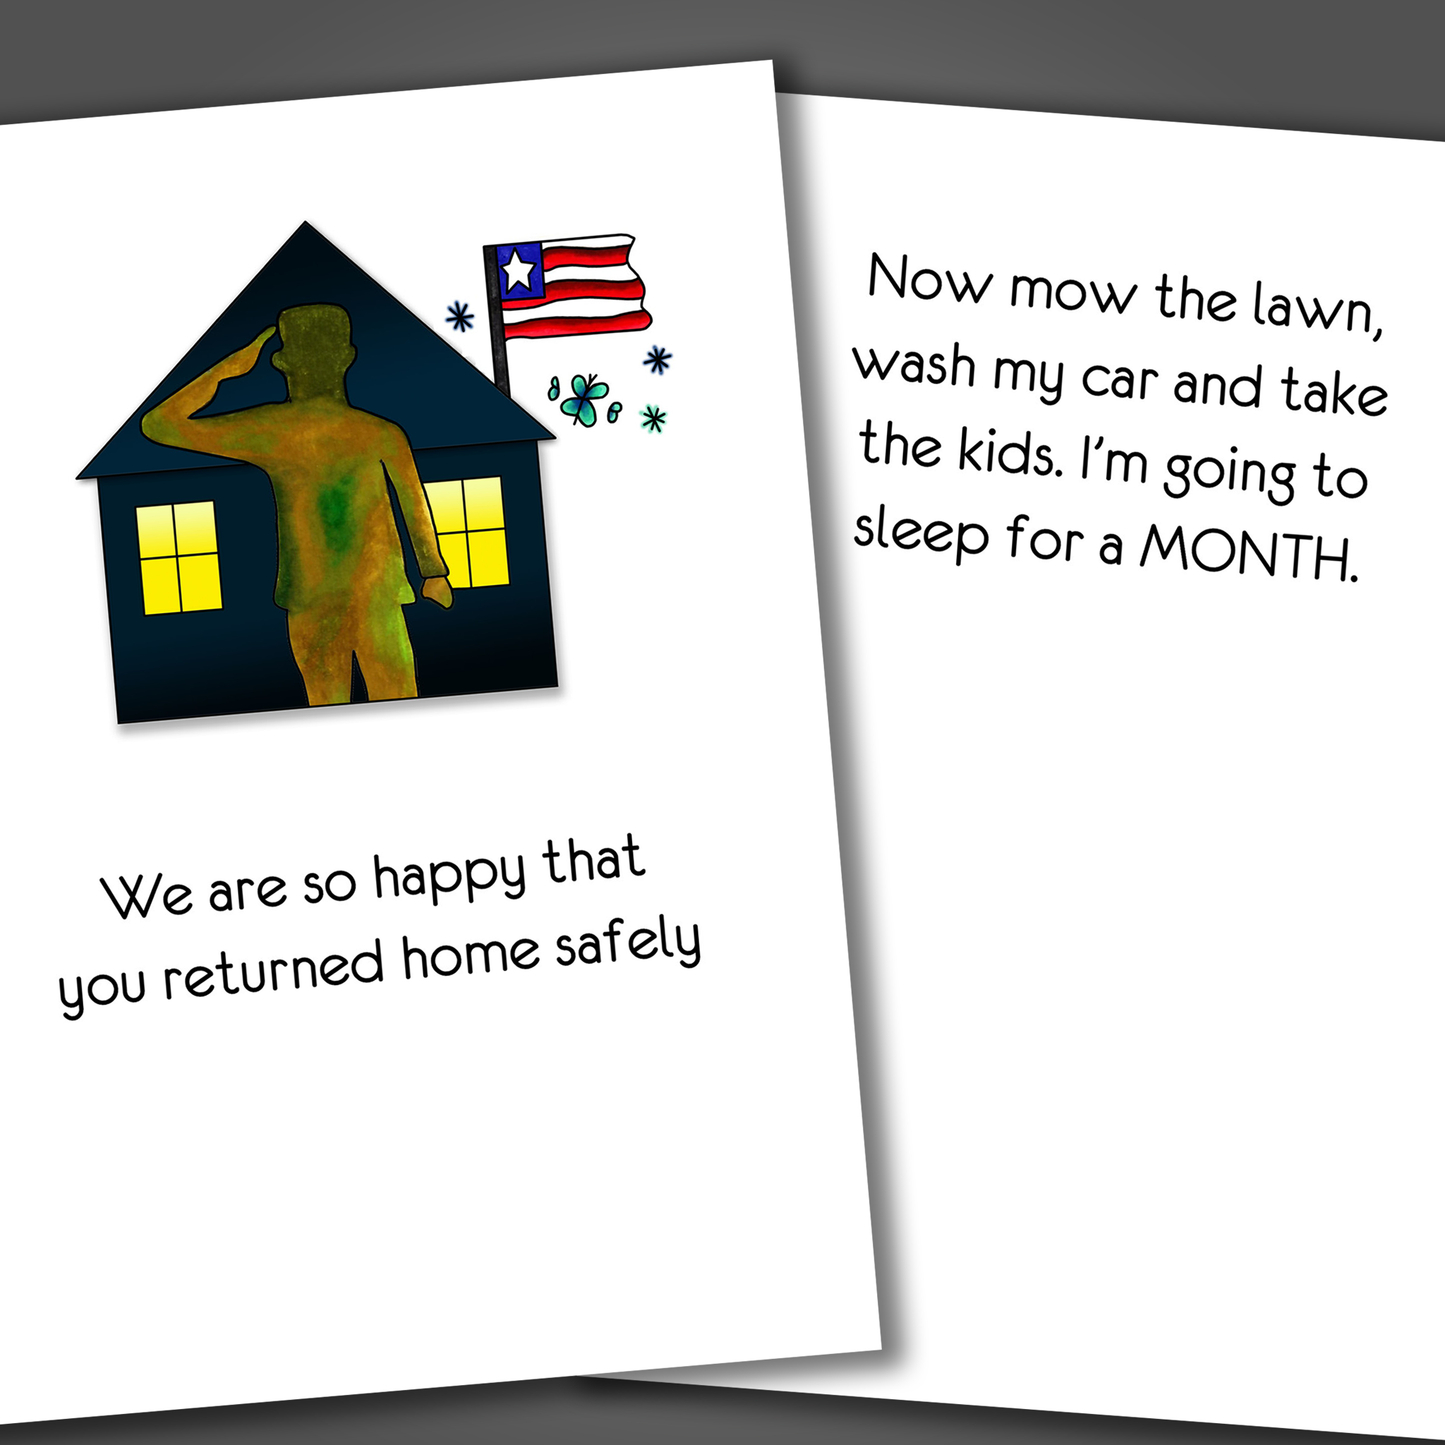 Funny welcome home card for a military member with a home and flag drawn on front of the card. Inside the card is a funny joke that ends in I am going to sleep for a month!